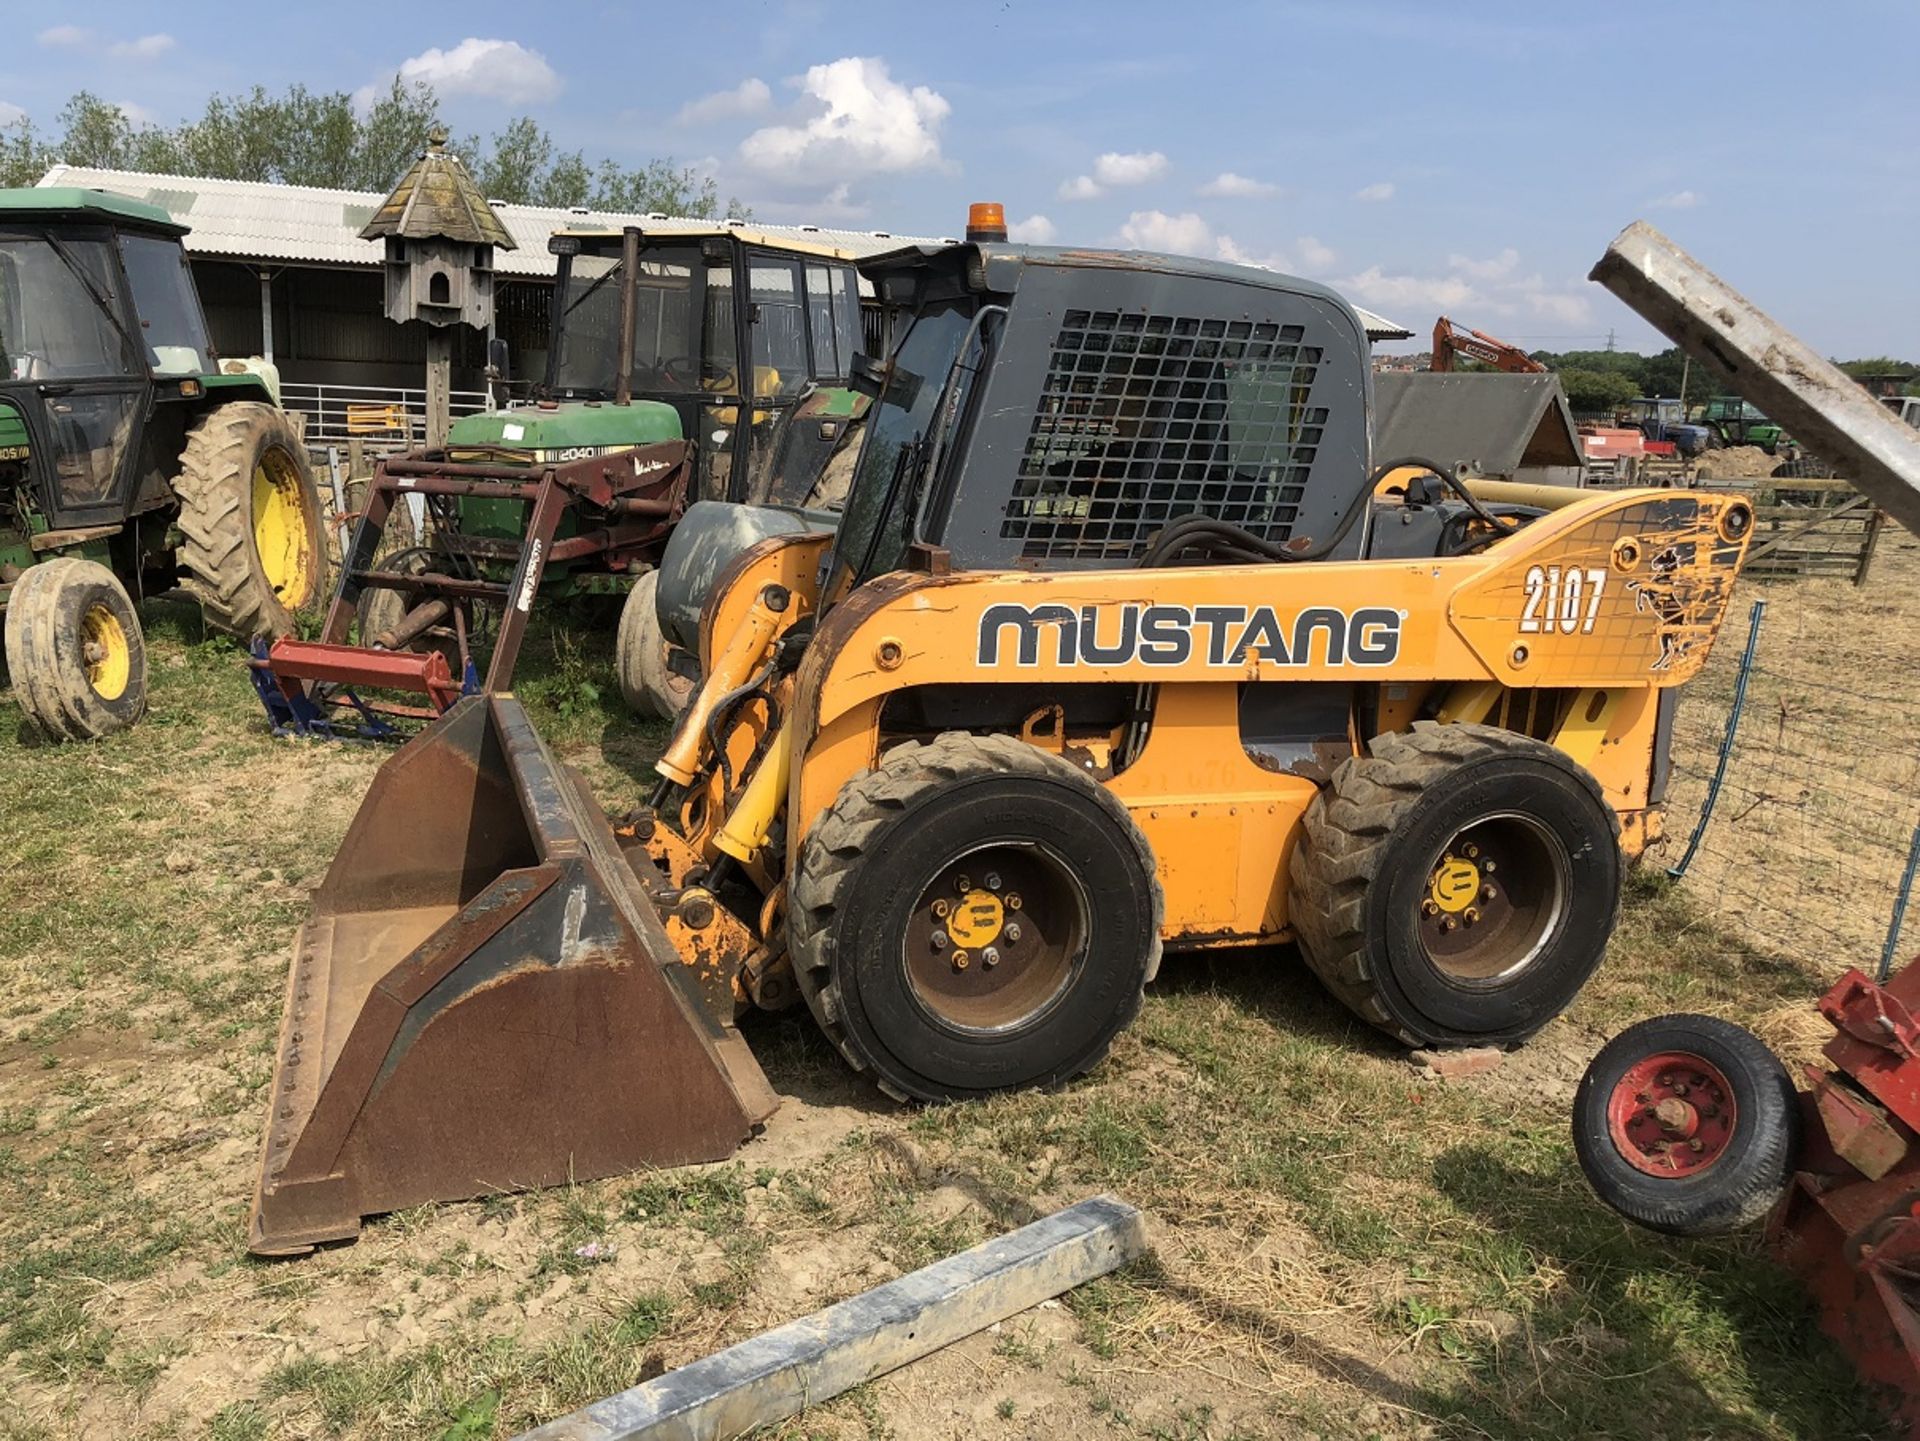 2005 MUSTANG 2107 SKID STEER LOADER WITH FULL ENCLOSED CAB, START, RUNS AND LIFTS *PLUS VAT* - Image 4 of 14